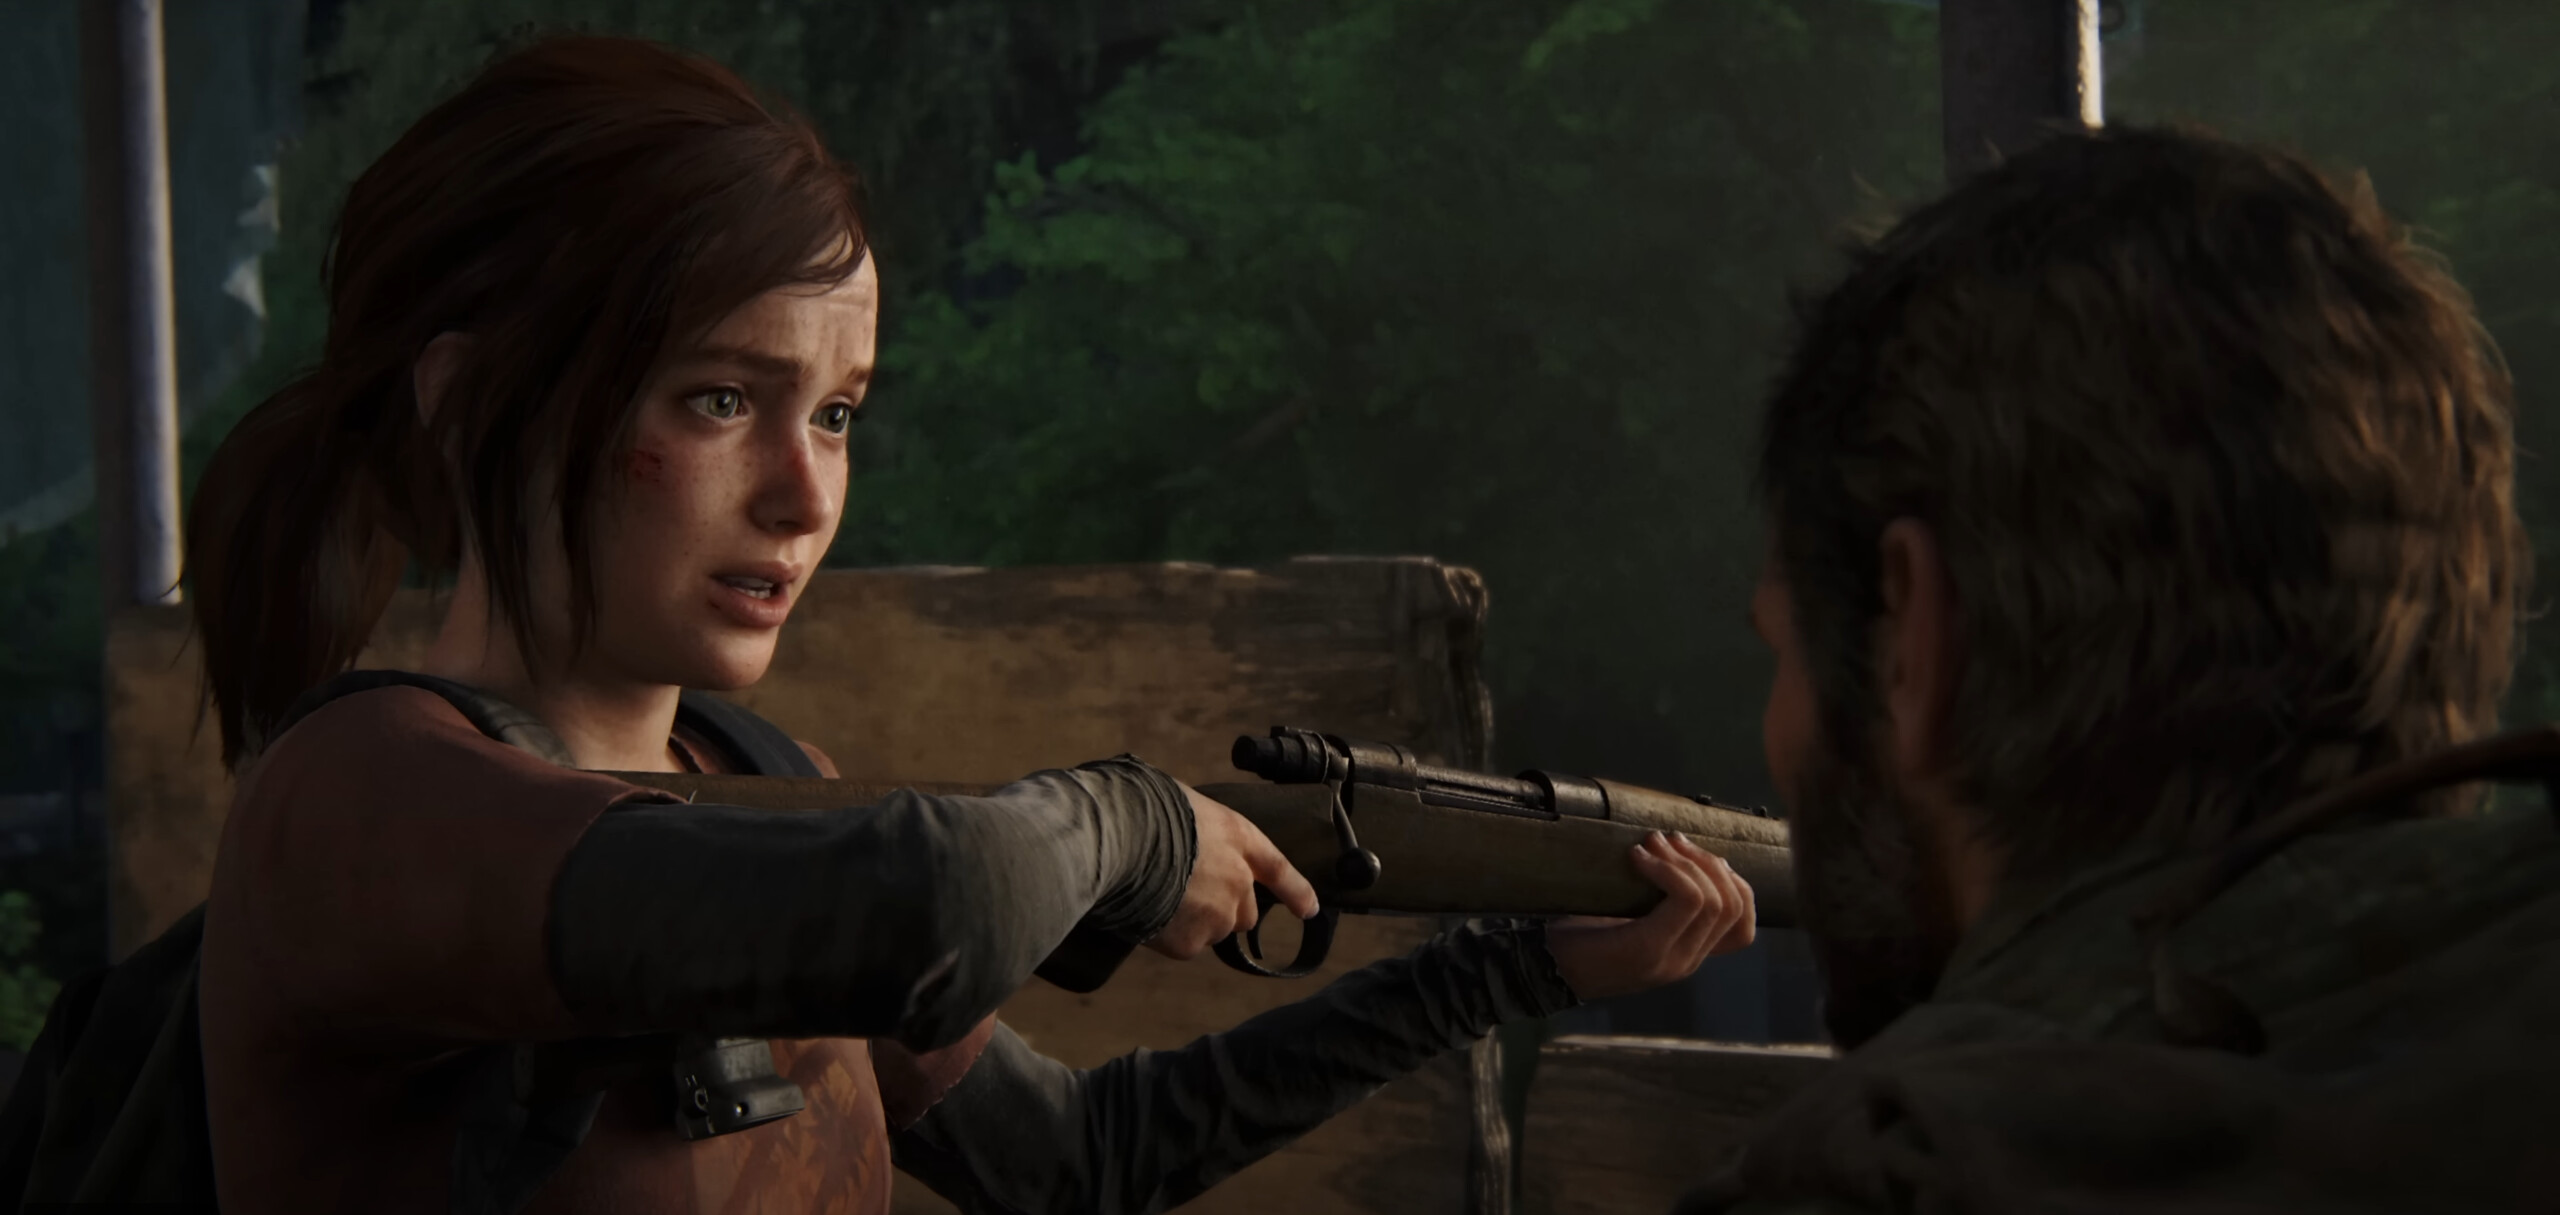 You'll Need a Beast of a Gaming PC To Run 'The Last of Us Part 1